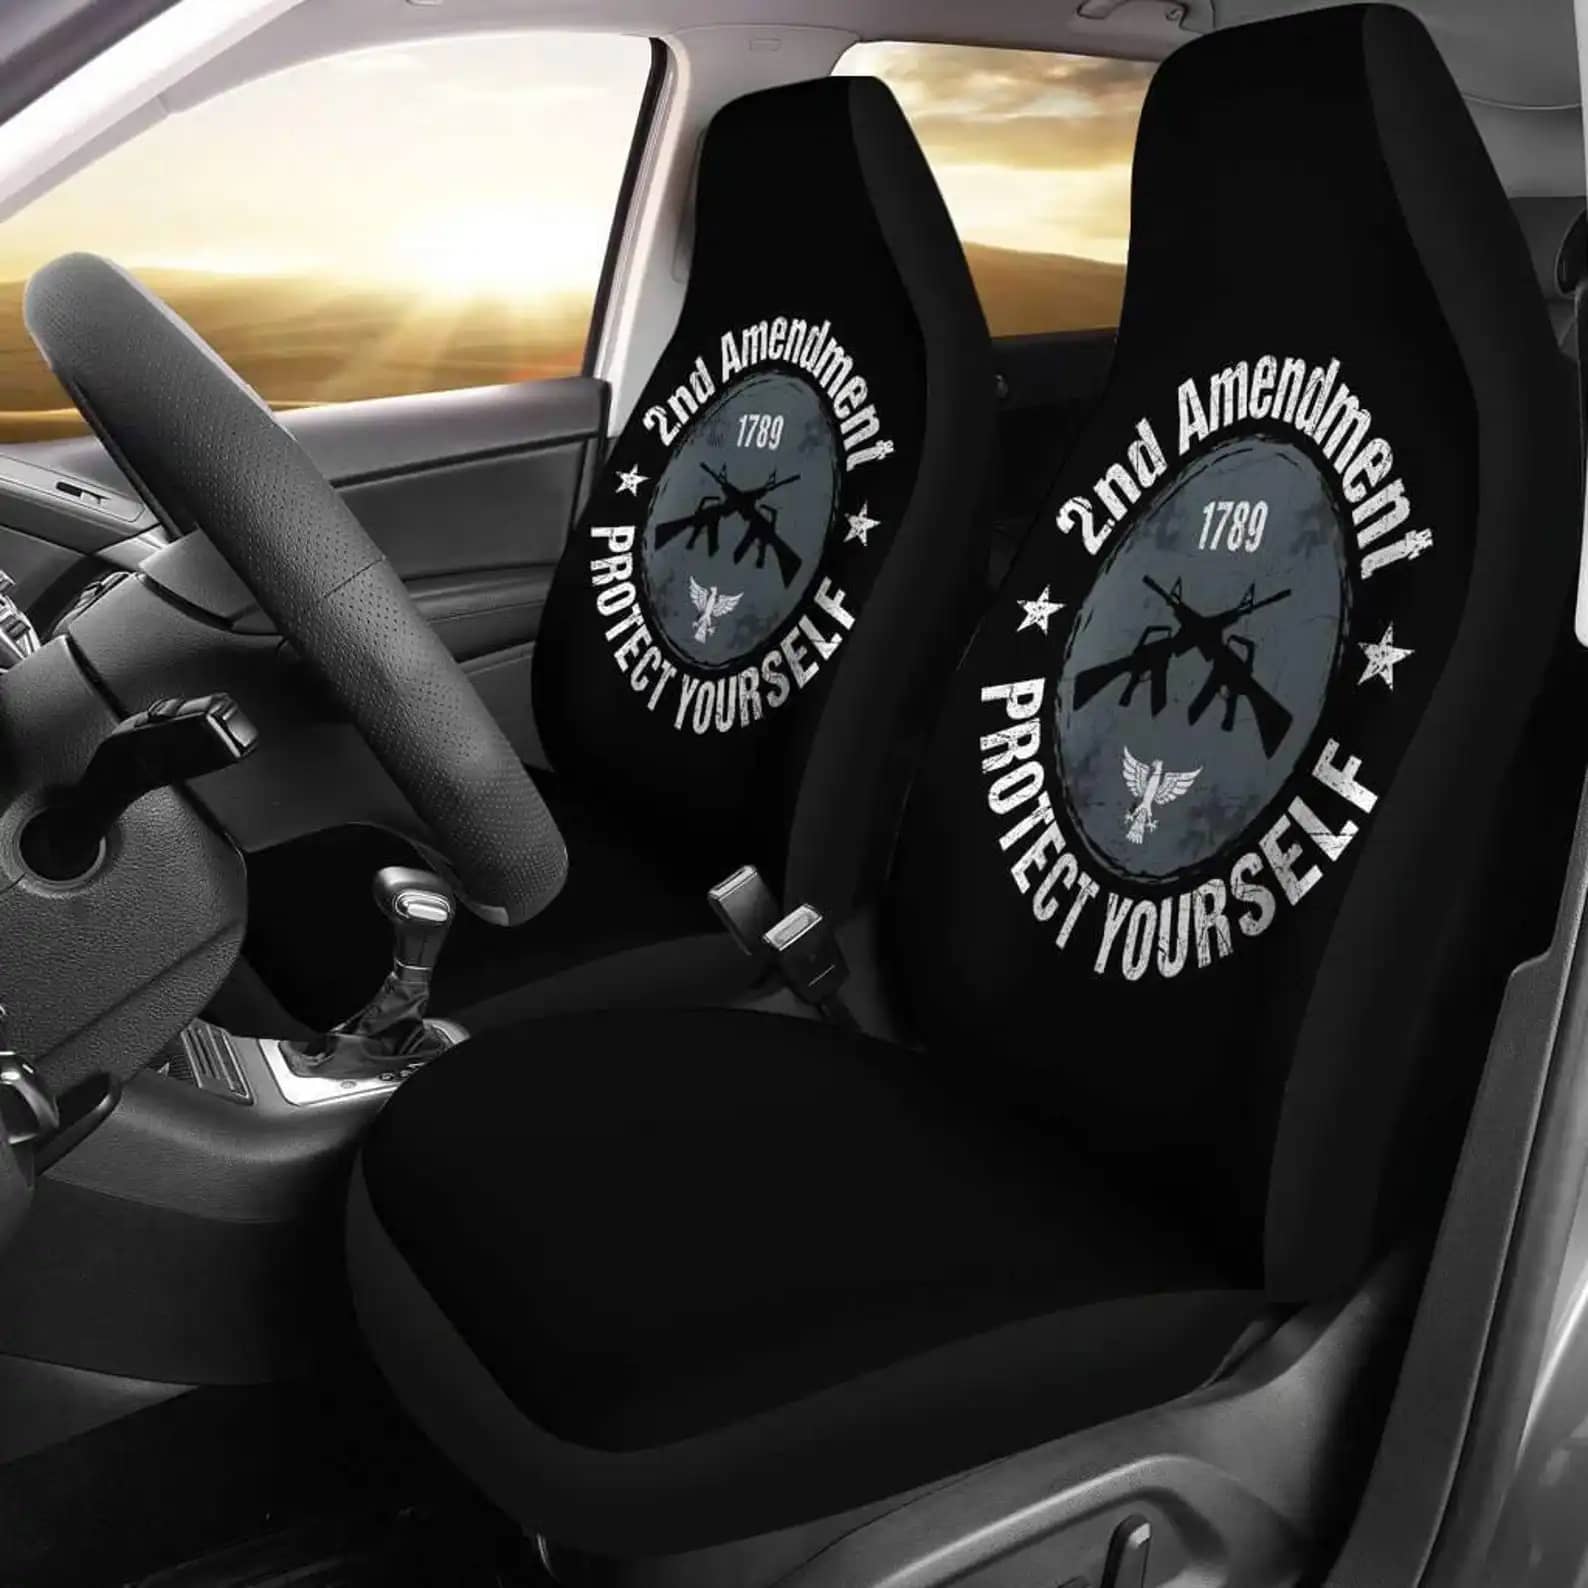 2Nd Amendment Protect Yourself Car Seat Covers